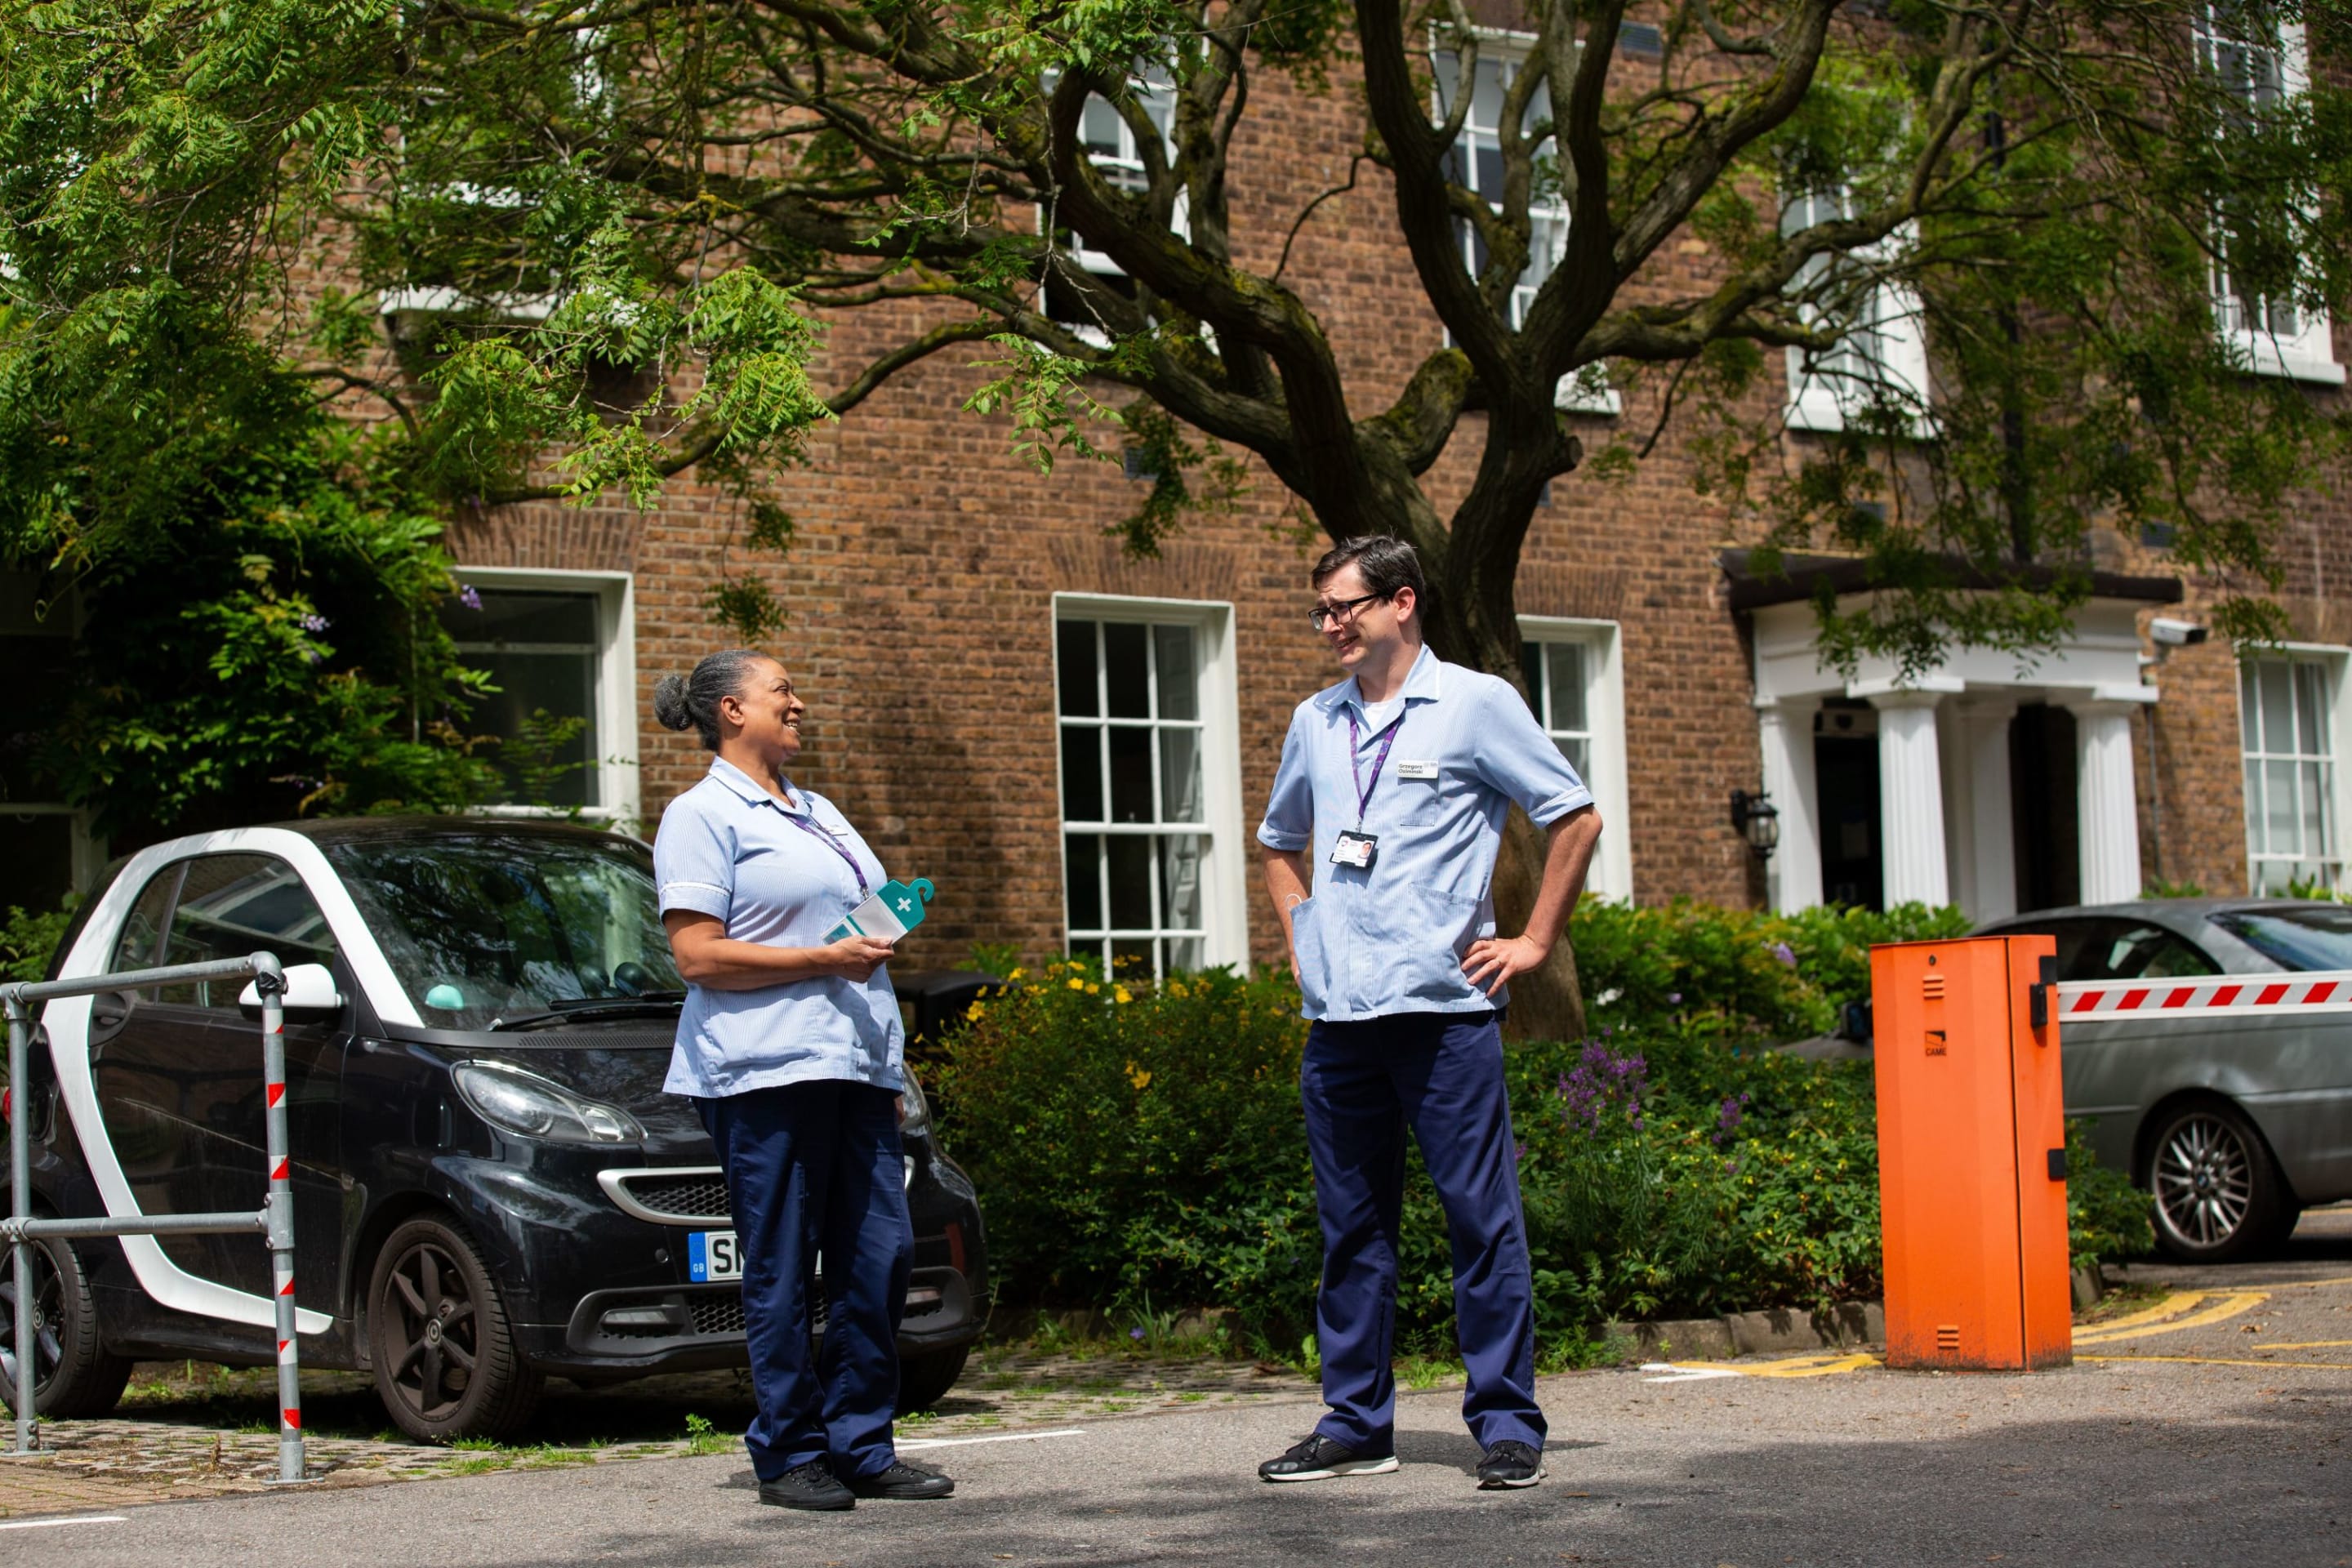 A male and female nurse standing outside a building chatting